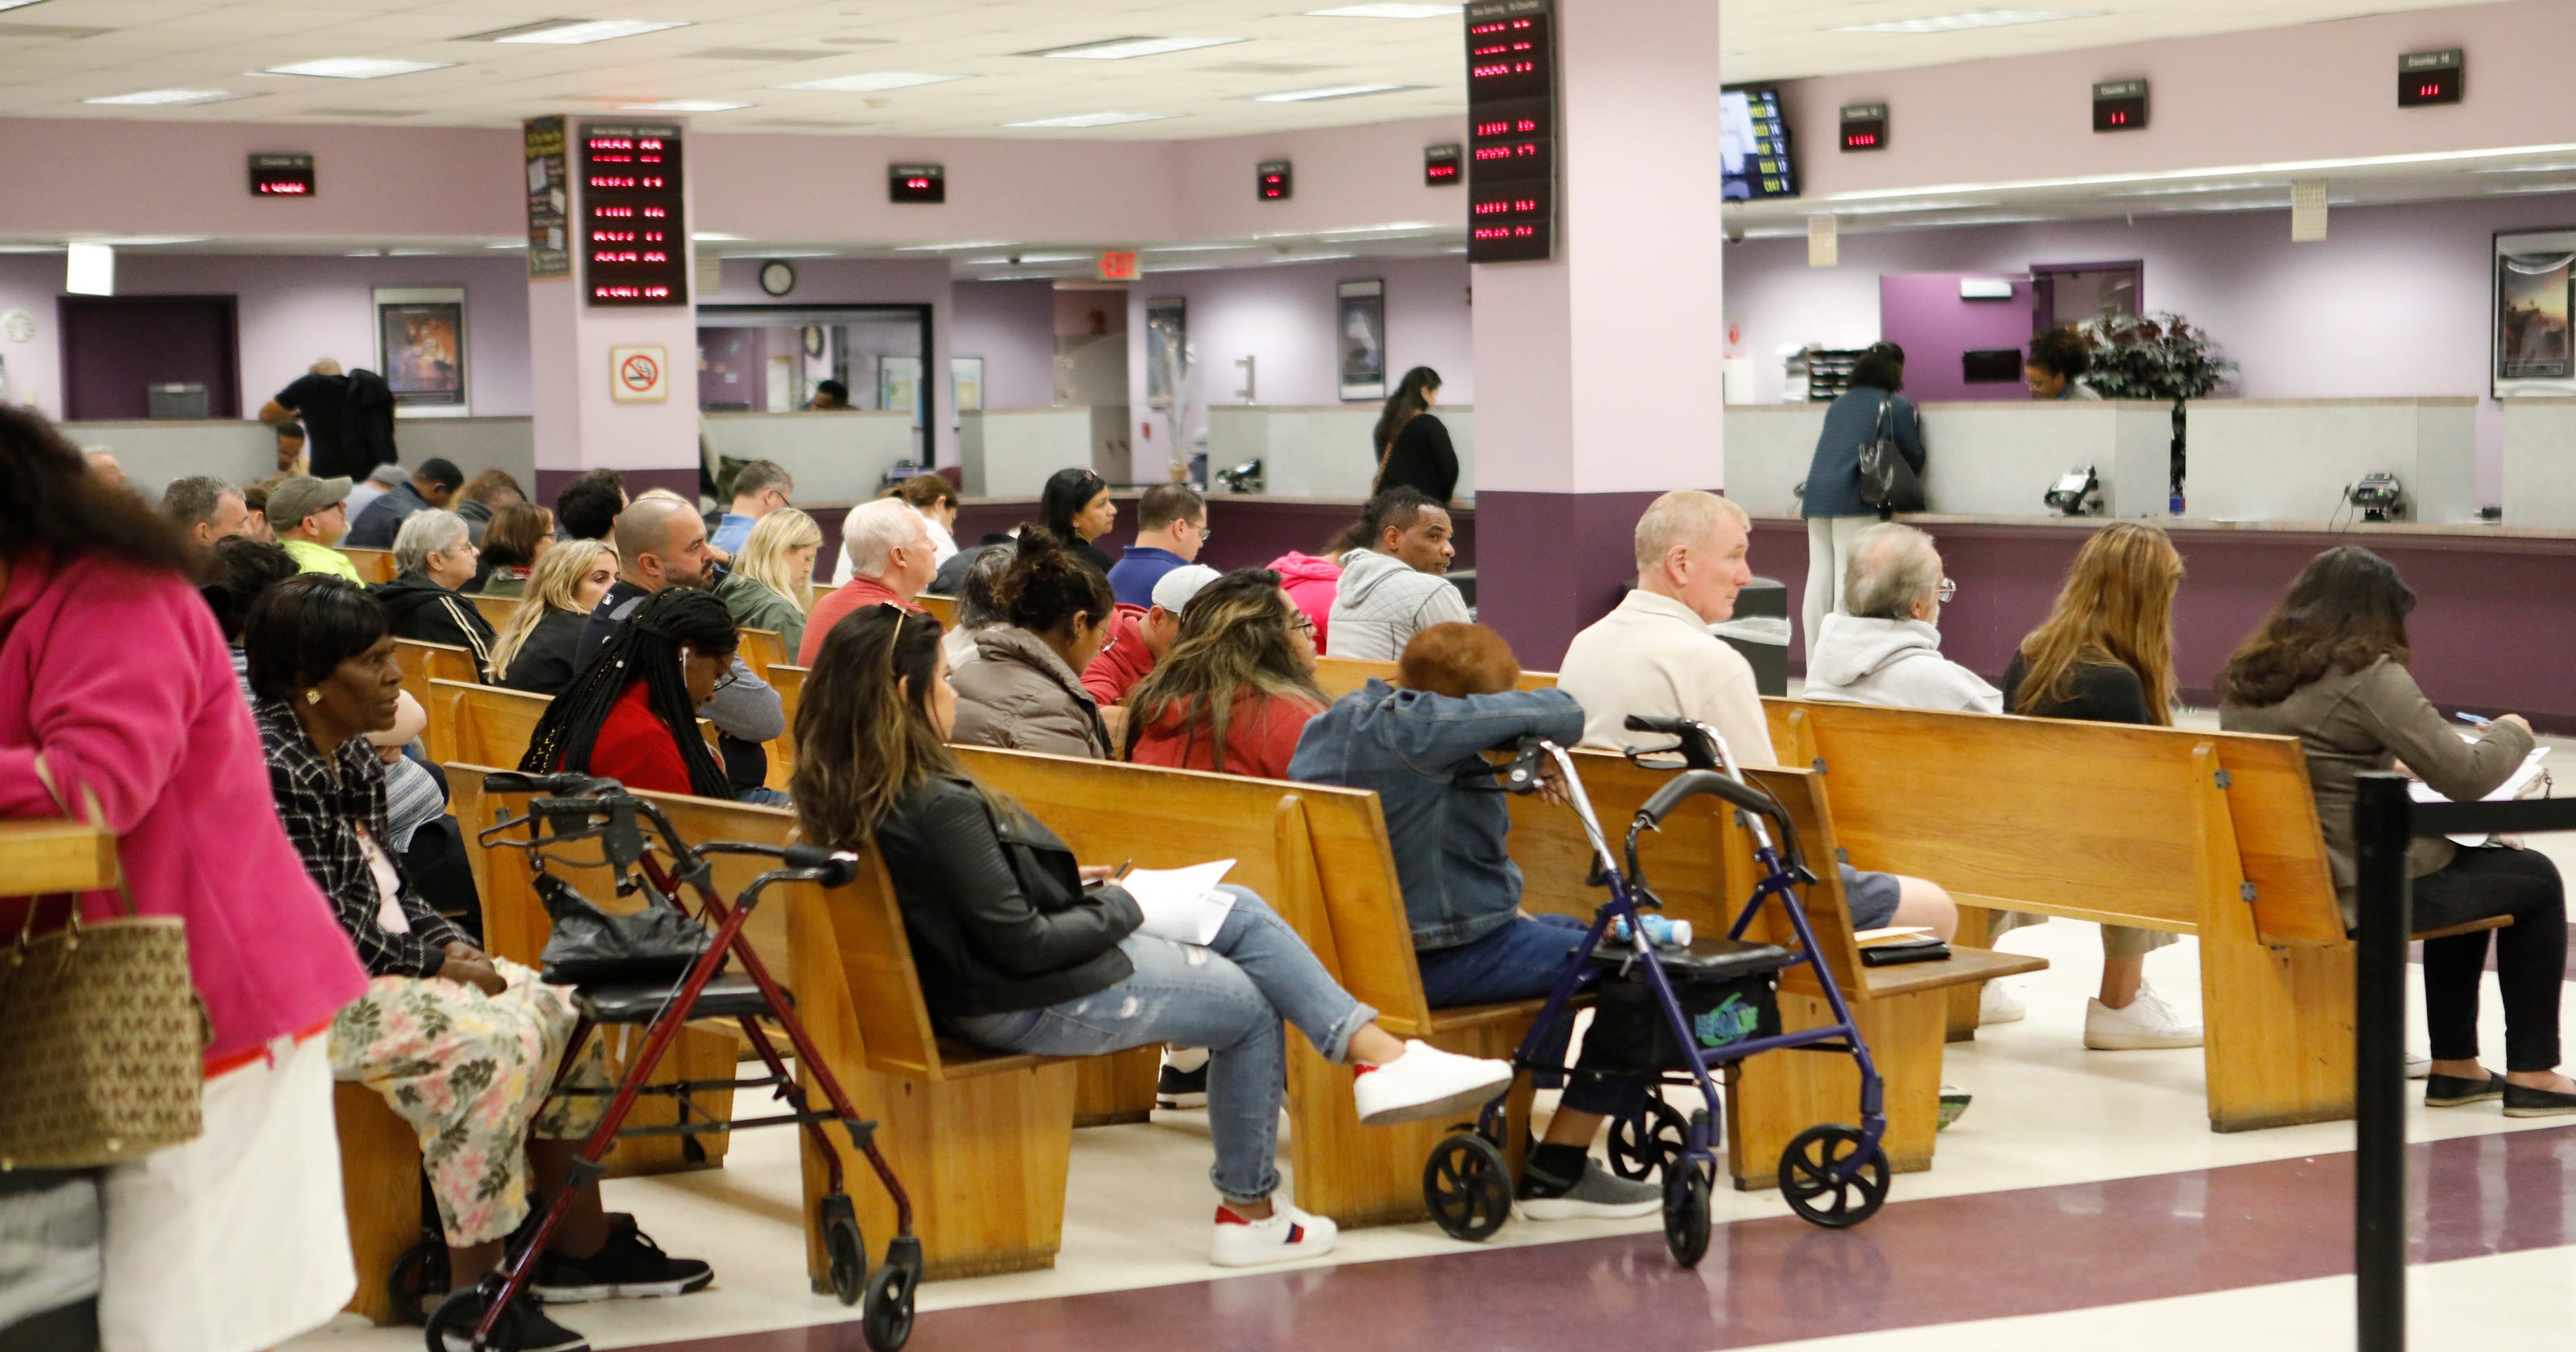 Real ID Enhanced licenses in NY: What to know and how to avoid DMV lines